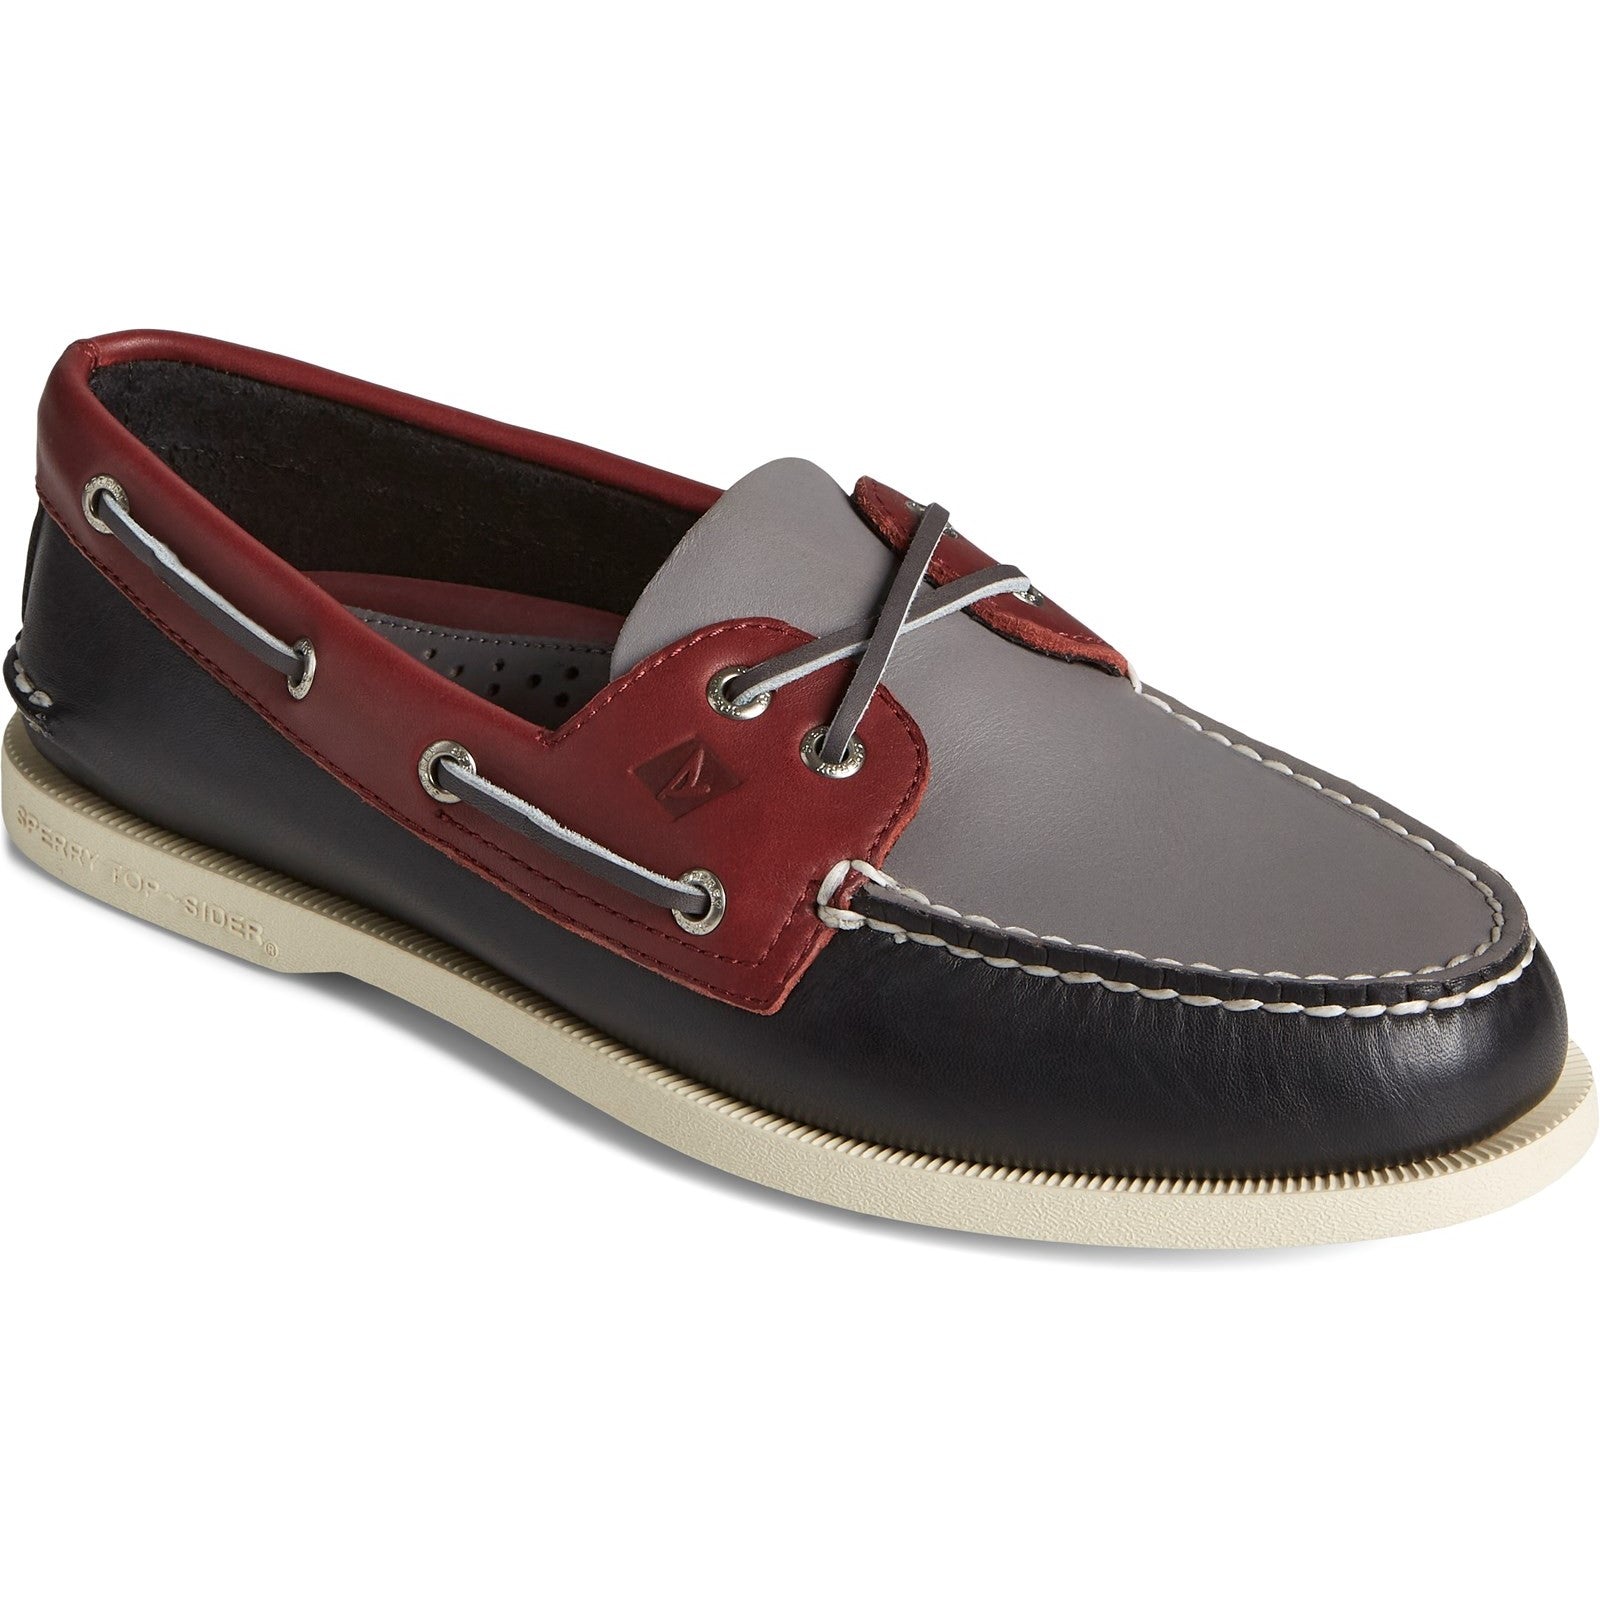 Sperry Mens Authentic Original 2-Eye Tri-Tone Boat Shoes - Navy